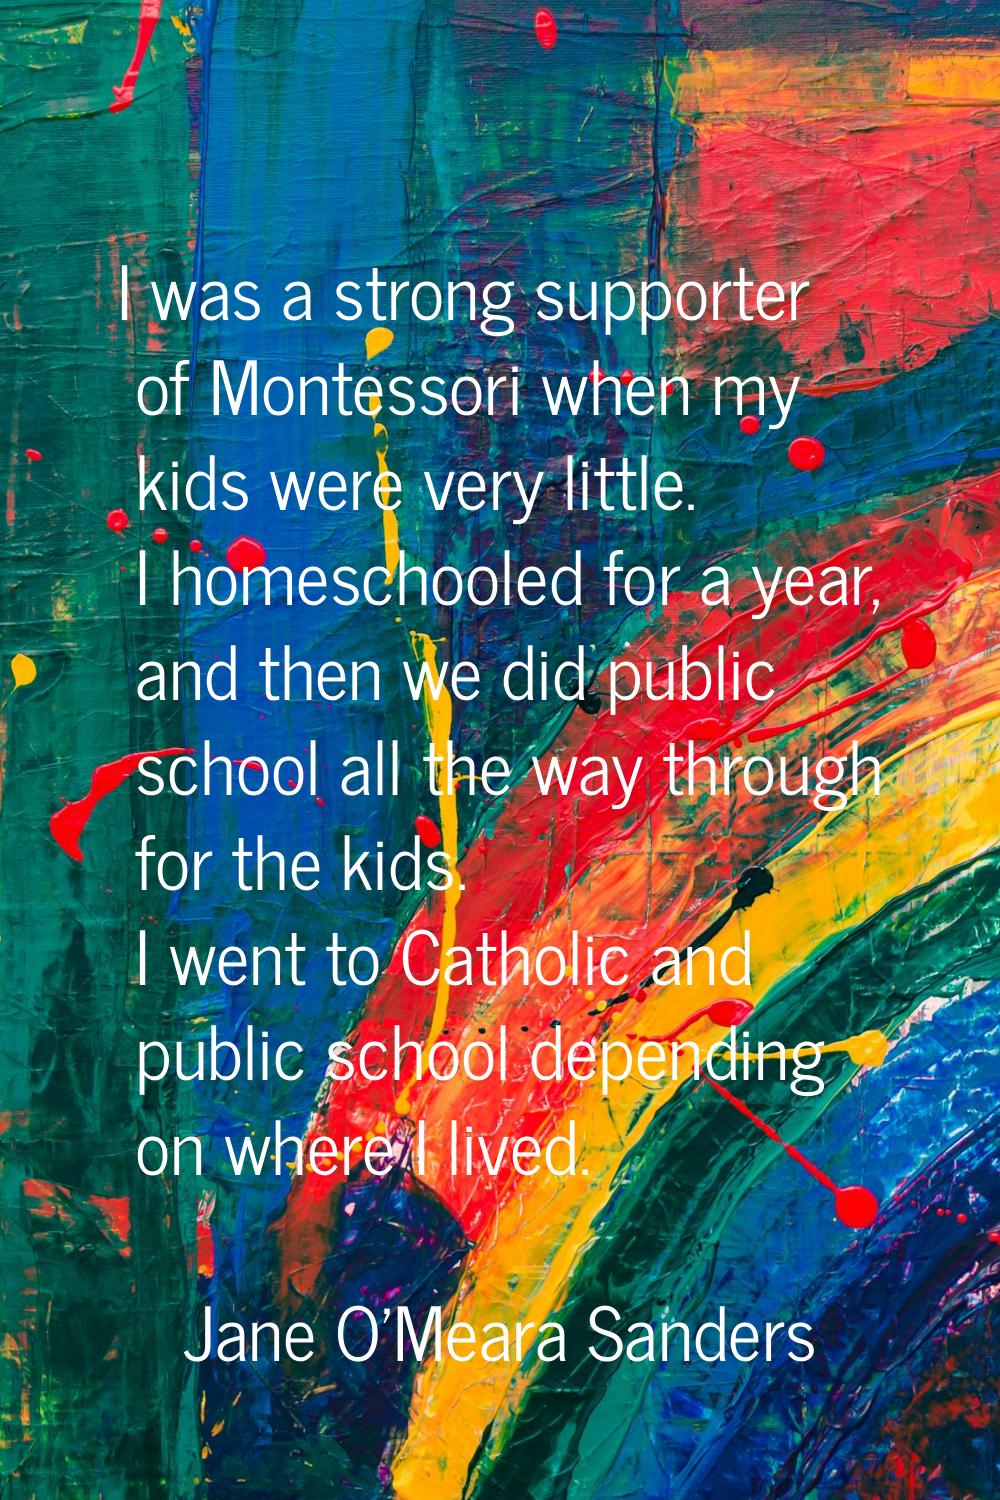 I was a strong supporter of Montessori when my kids were very little. I homeschooled for a year, an